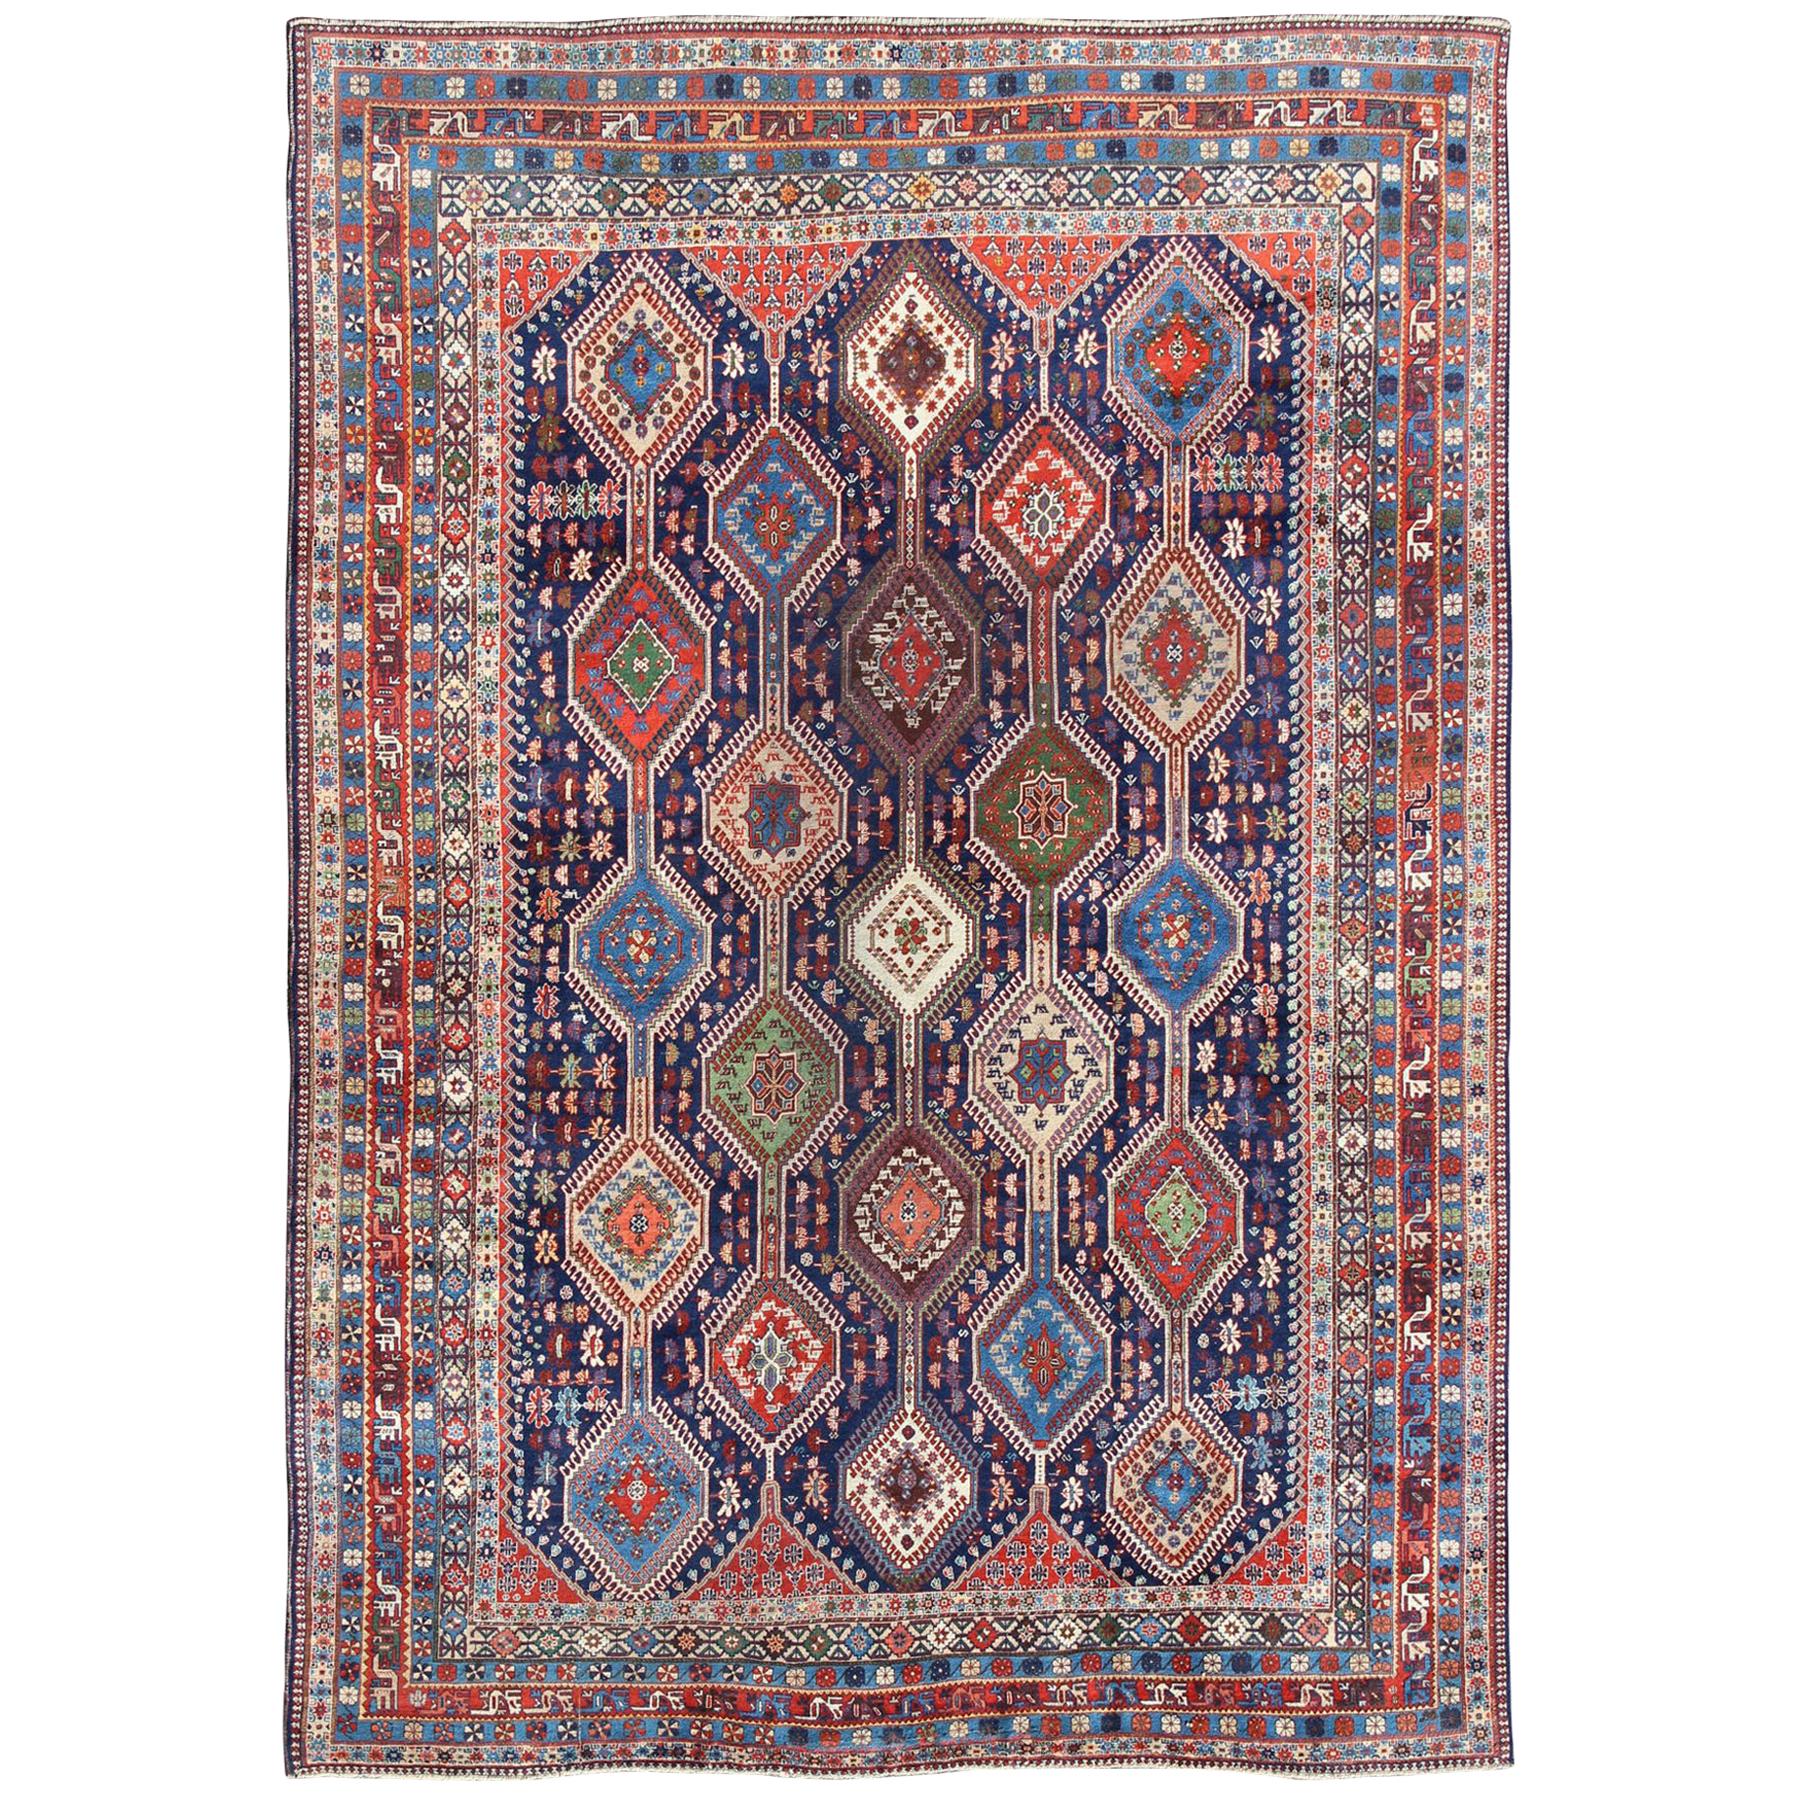 Antique Persian Large Afshar Rug with Rich Jewel Tones and Diamond Design